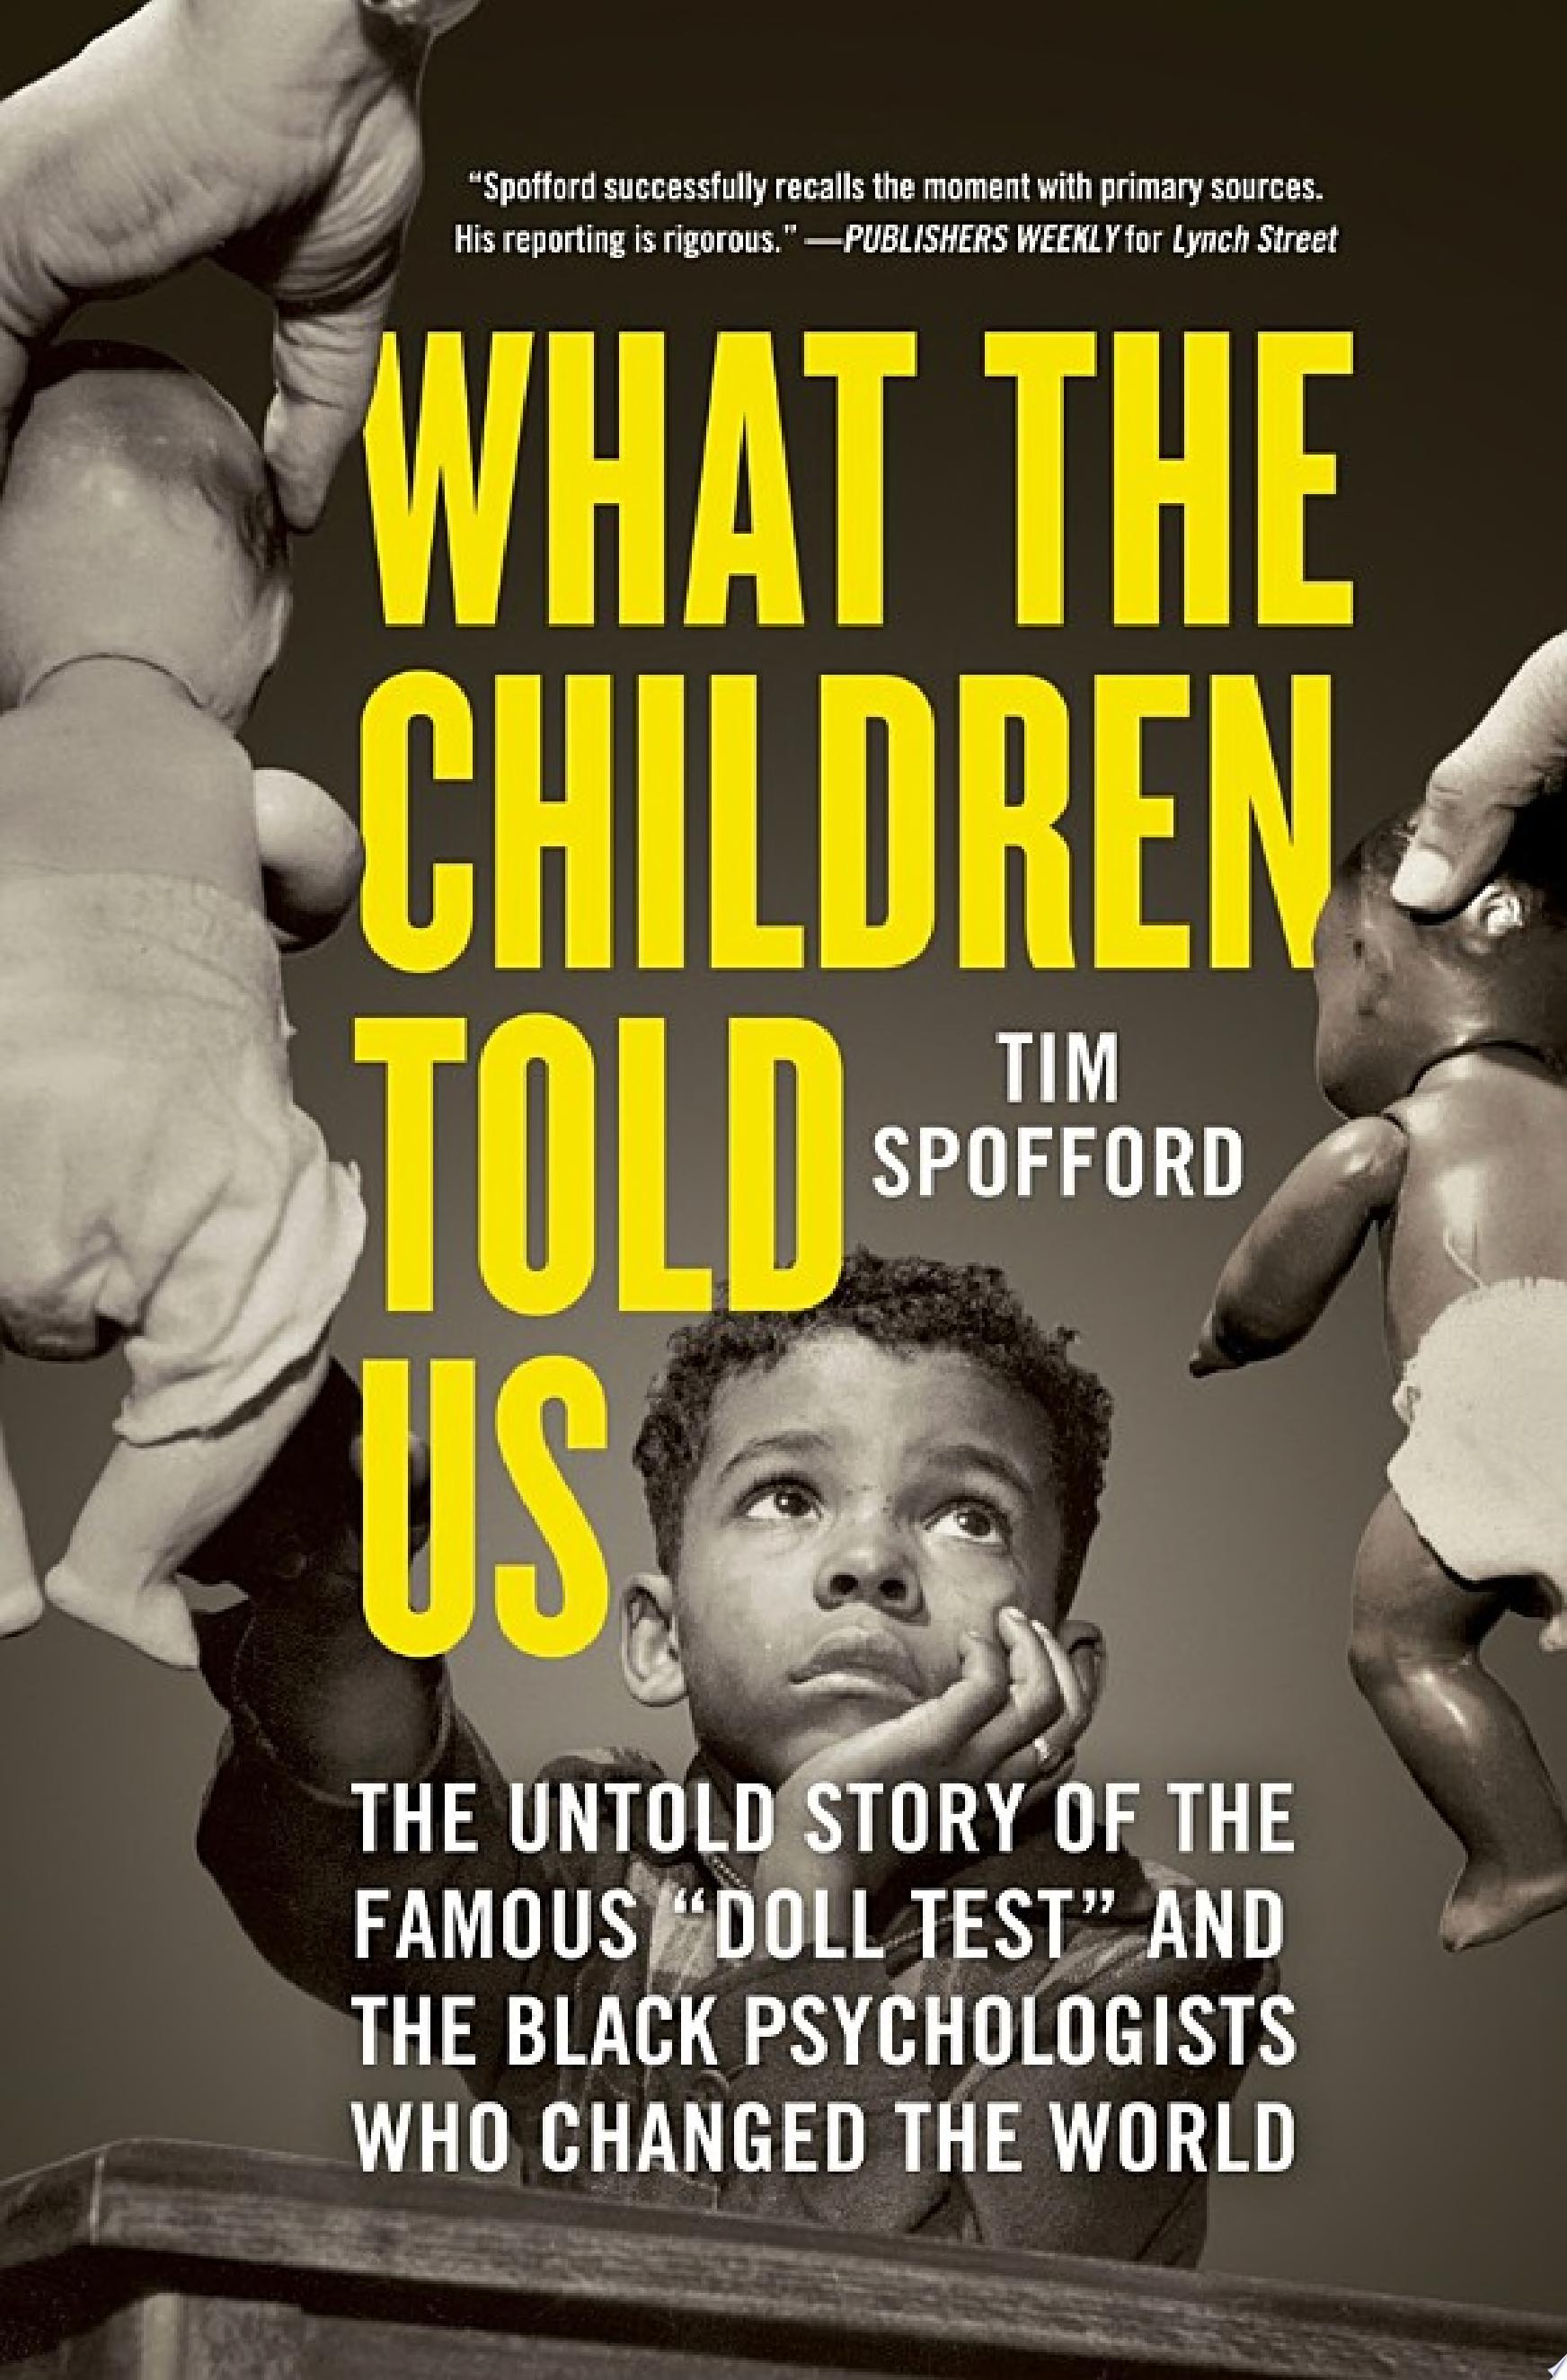 Image for "What the Children Told Us"